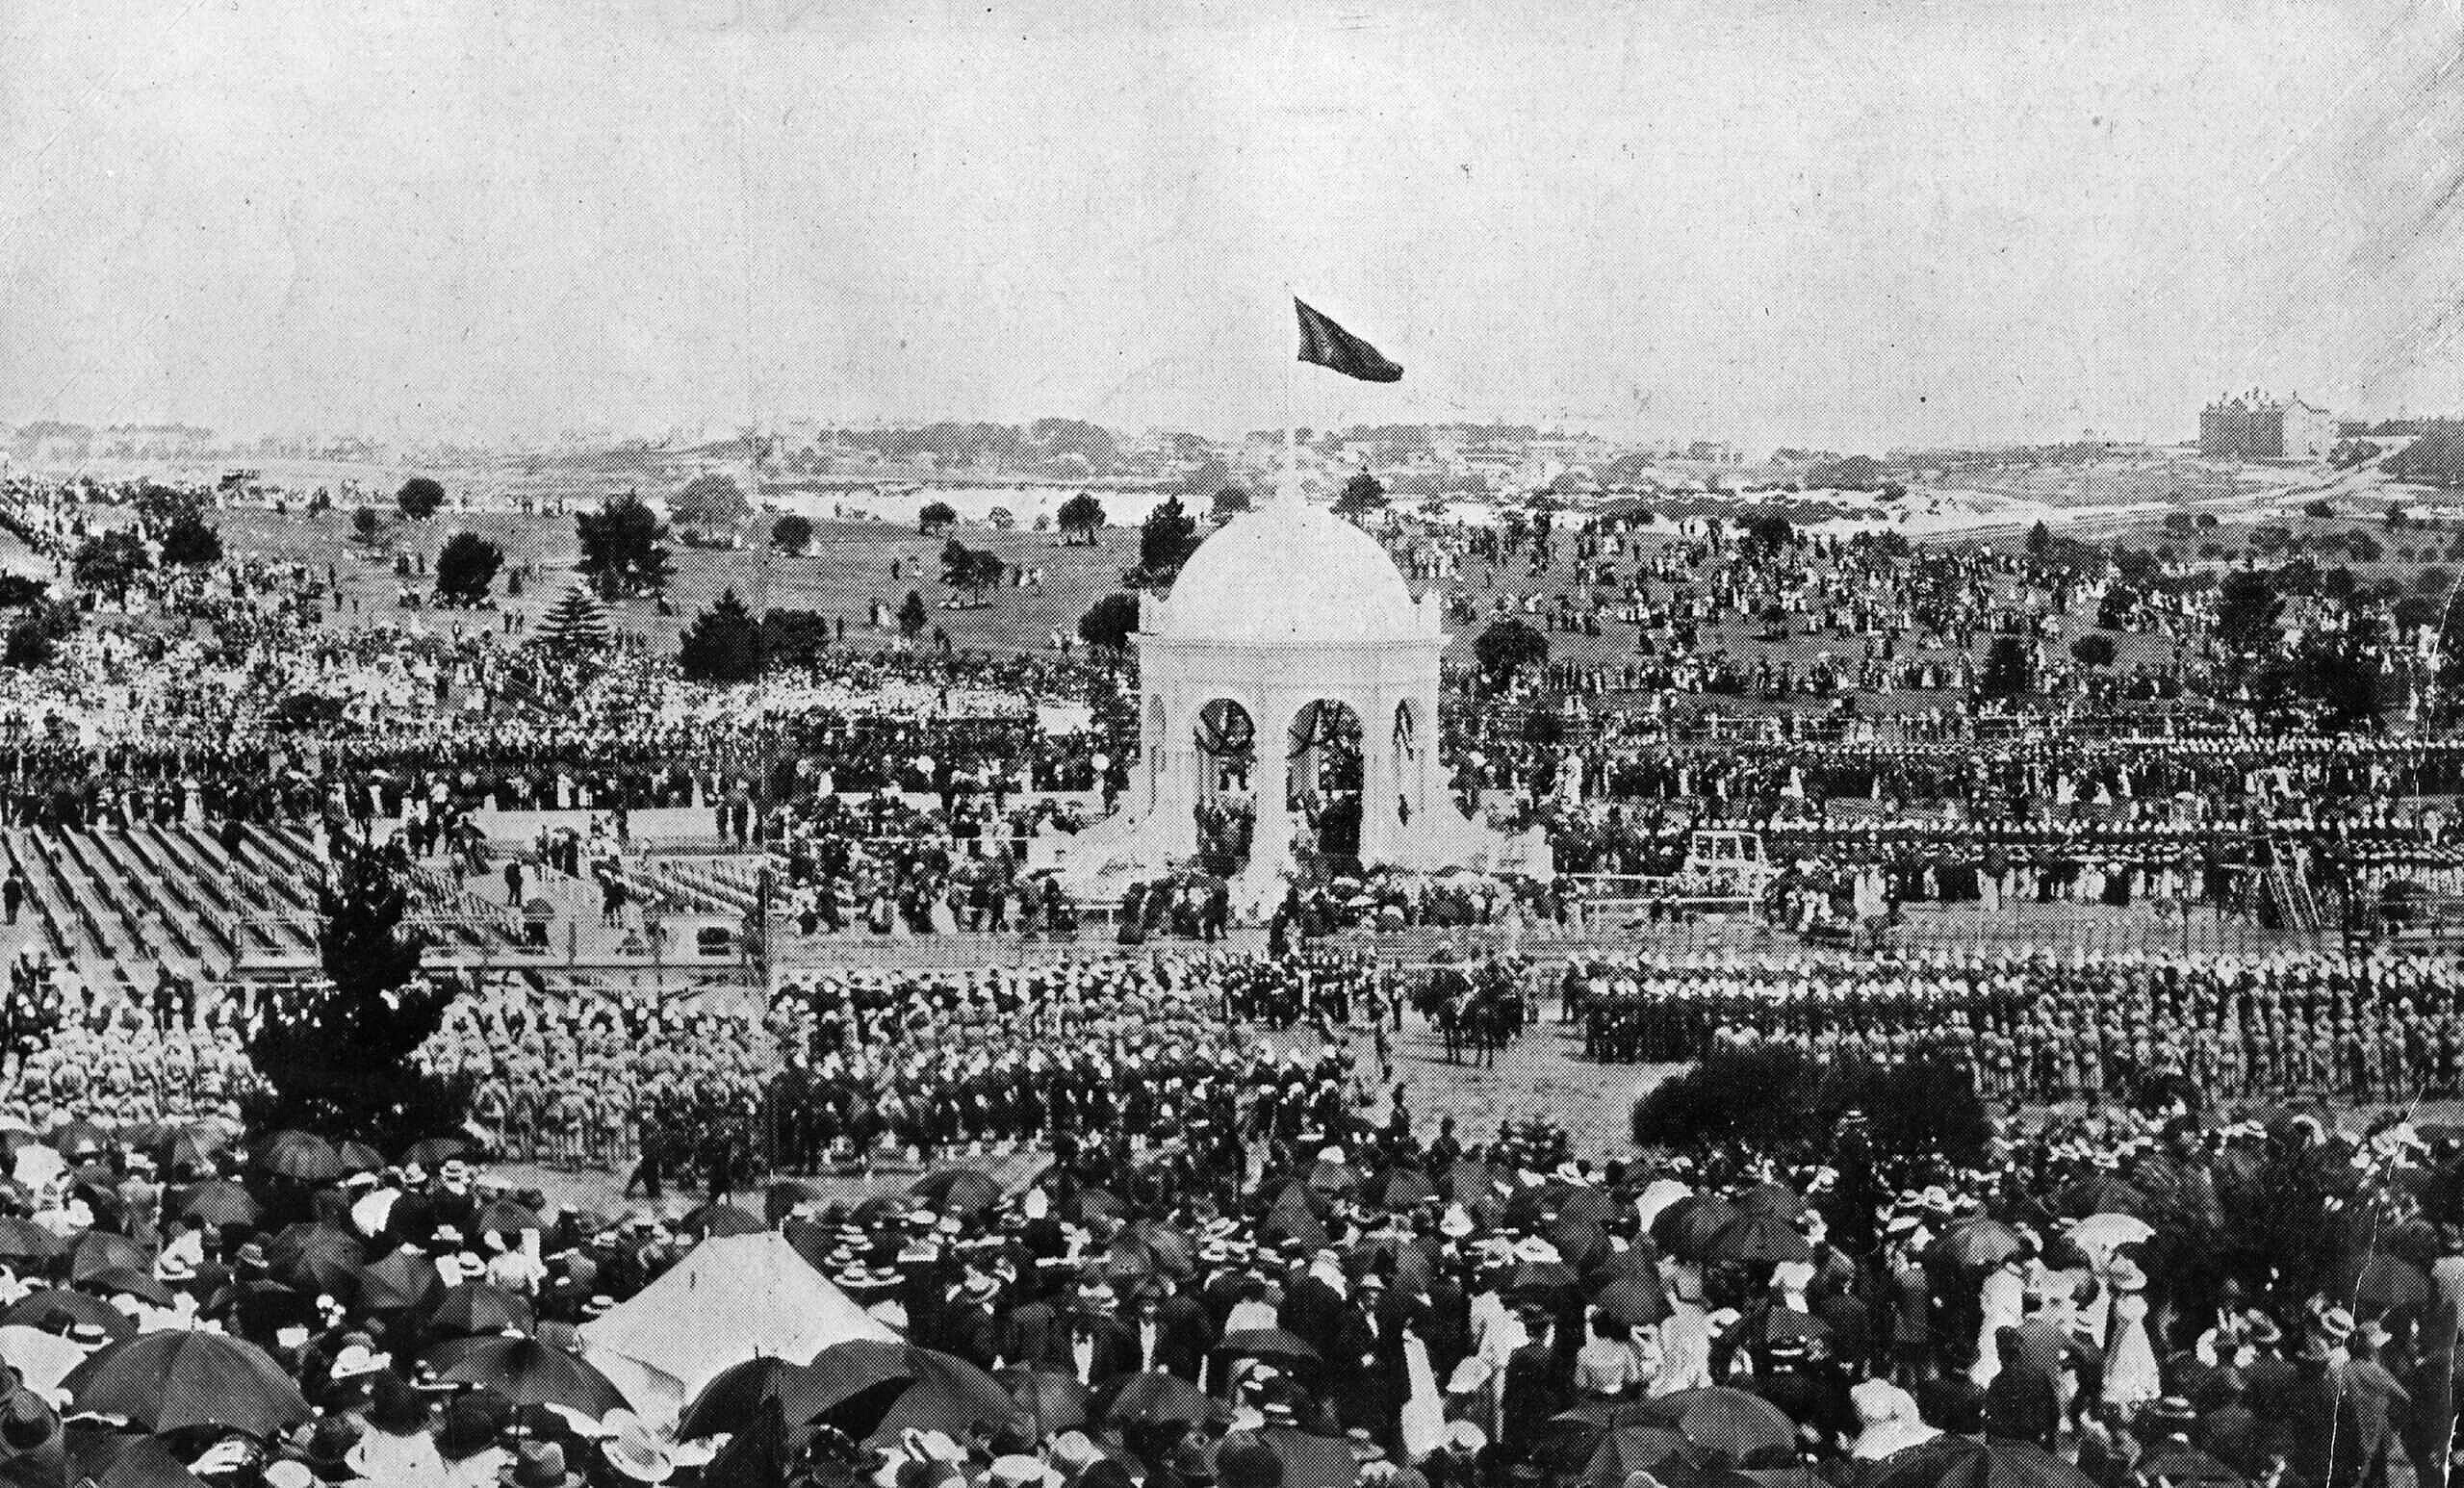 1st January 1901: The birth of the Australian Commonwealth in Centennial Park, Sydney. (Photo by Hulton Archive/Getty Images)